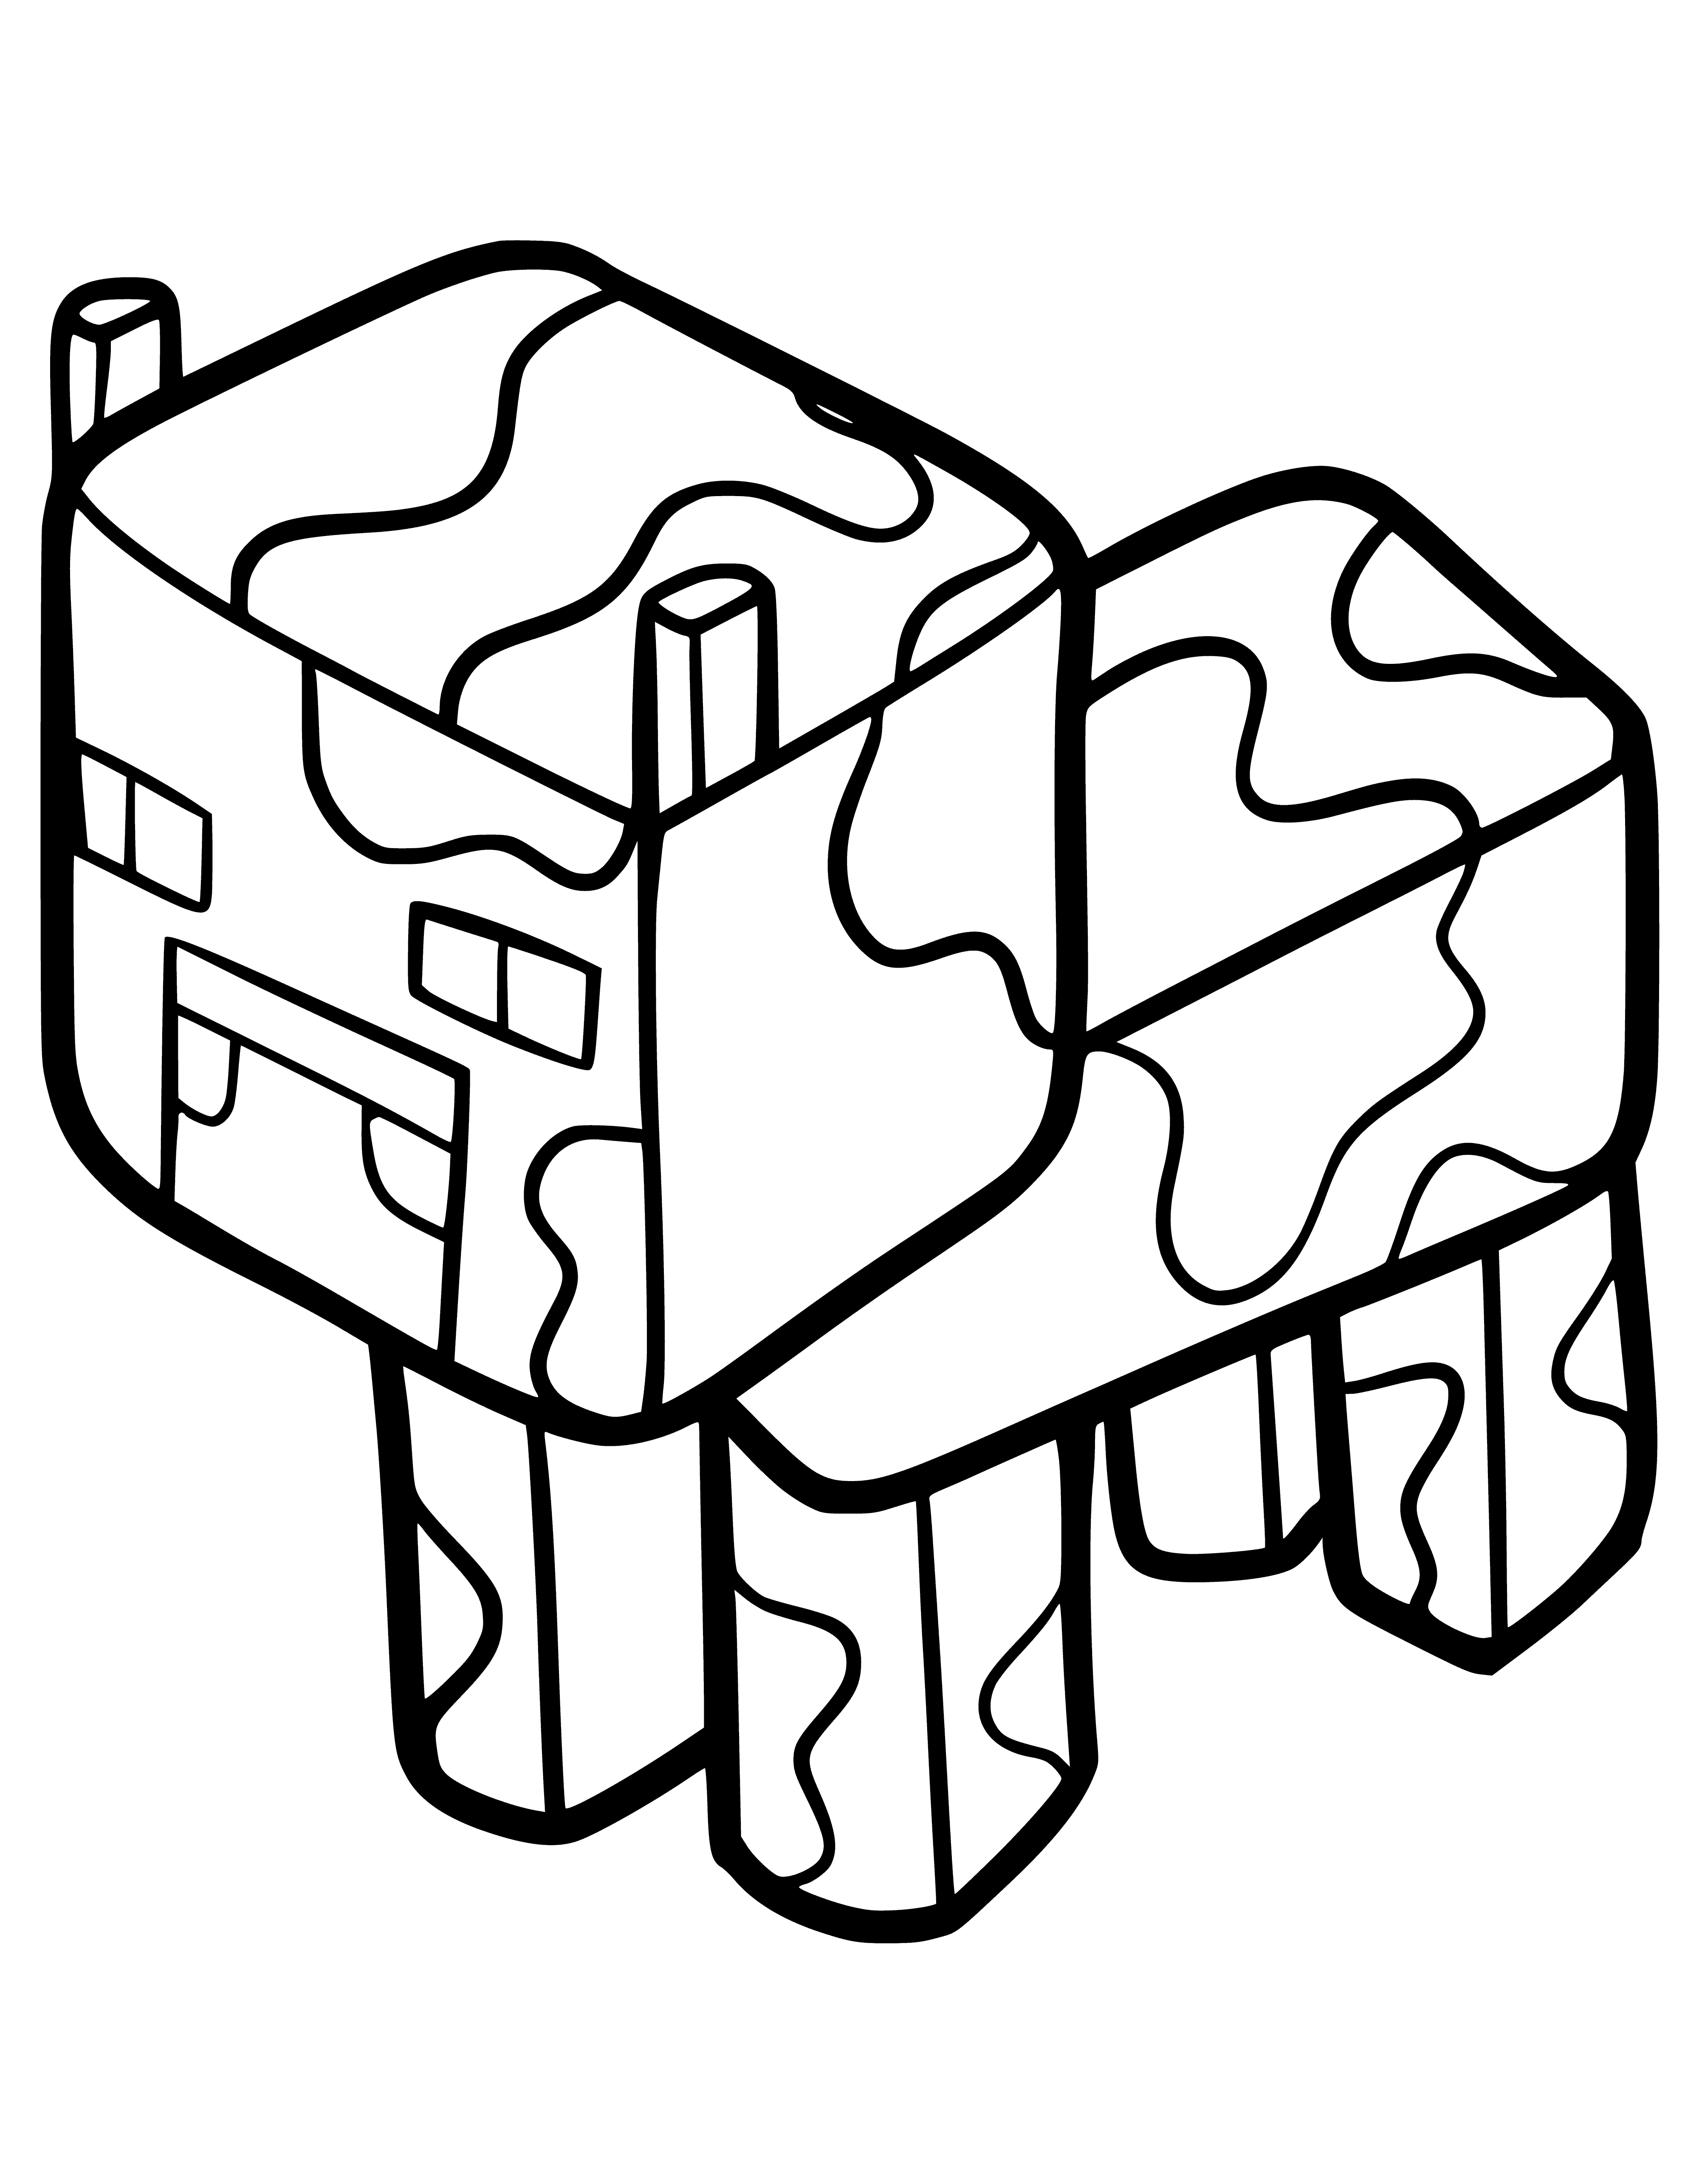 coloring page: The Minecraft cow has big, dark eyes, a fluffy tail, and stands in a green field with grass and trees.